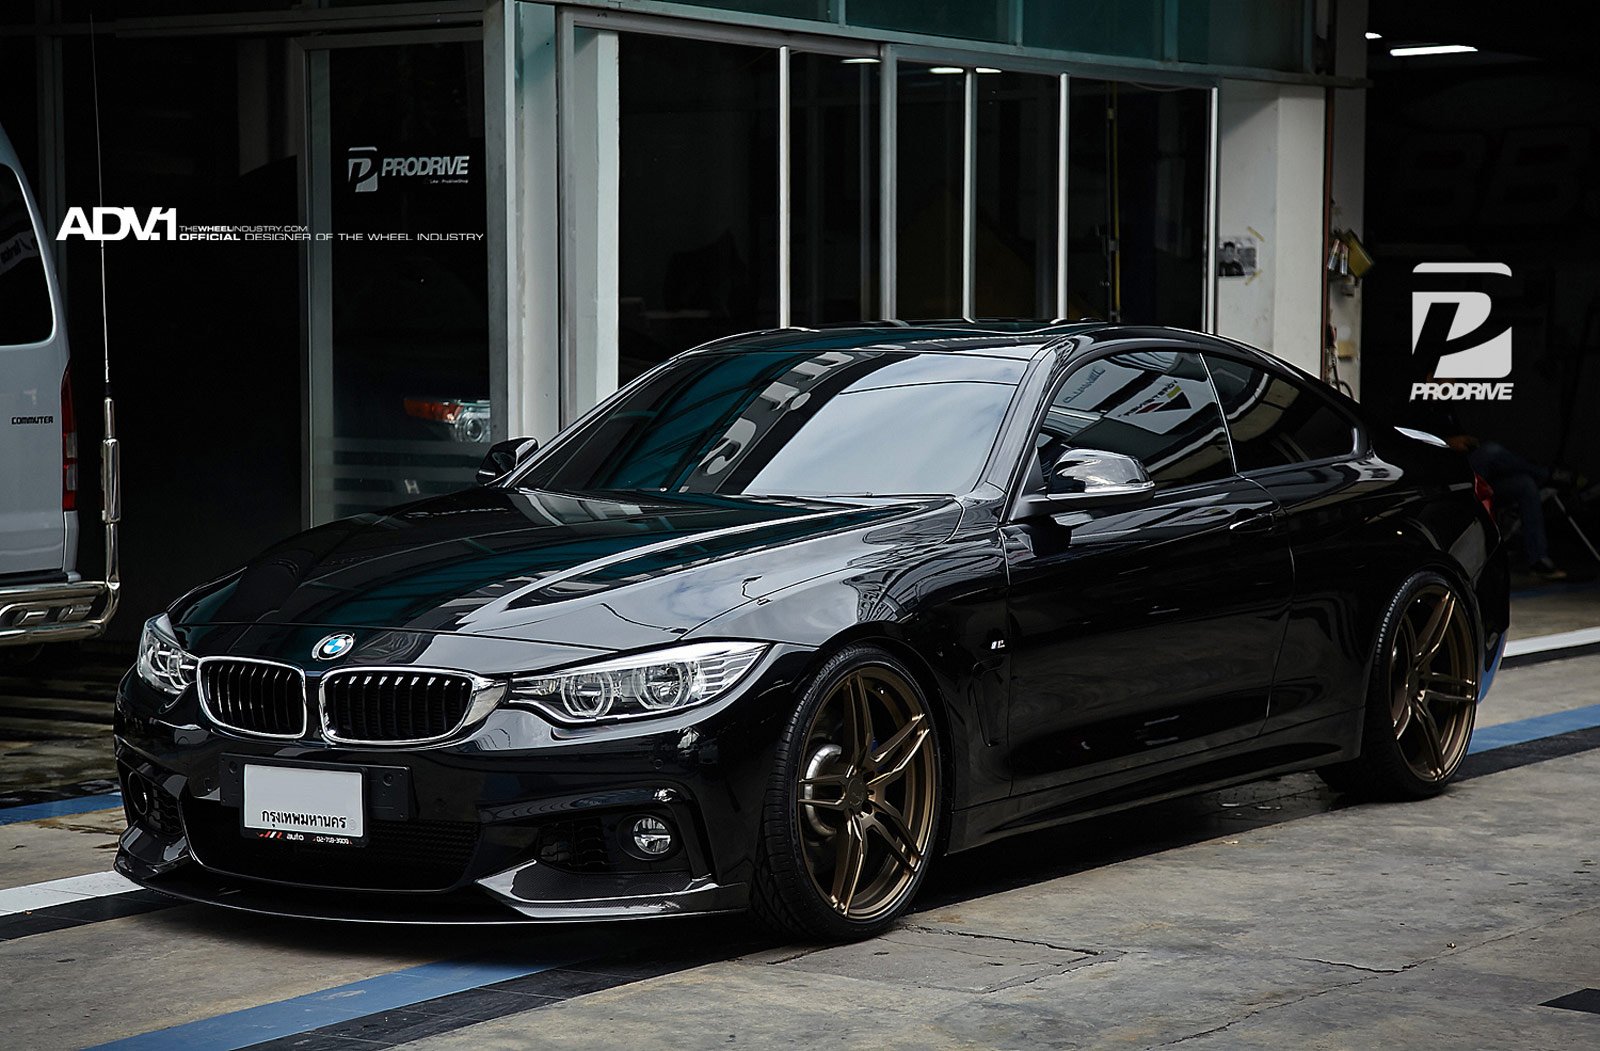 adv1, Wheels, Bmw, F32, 435i, Coupe, Tuning, Cars Wallpaper